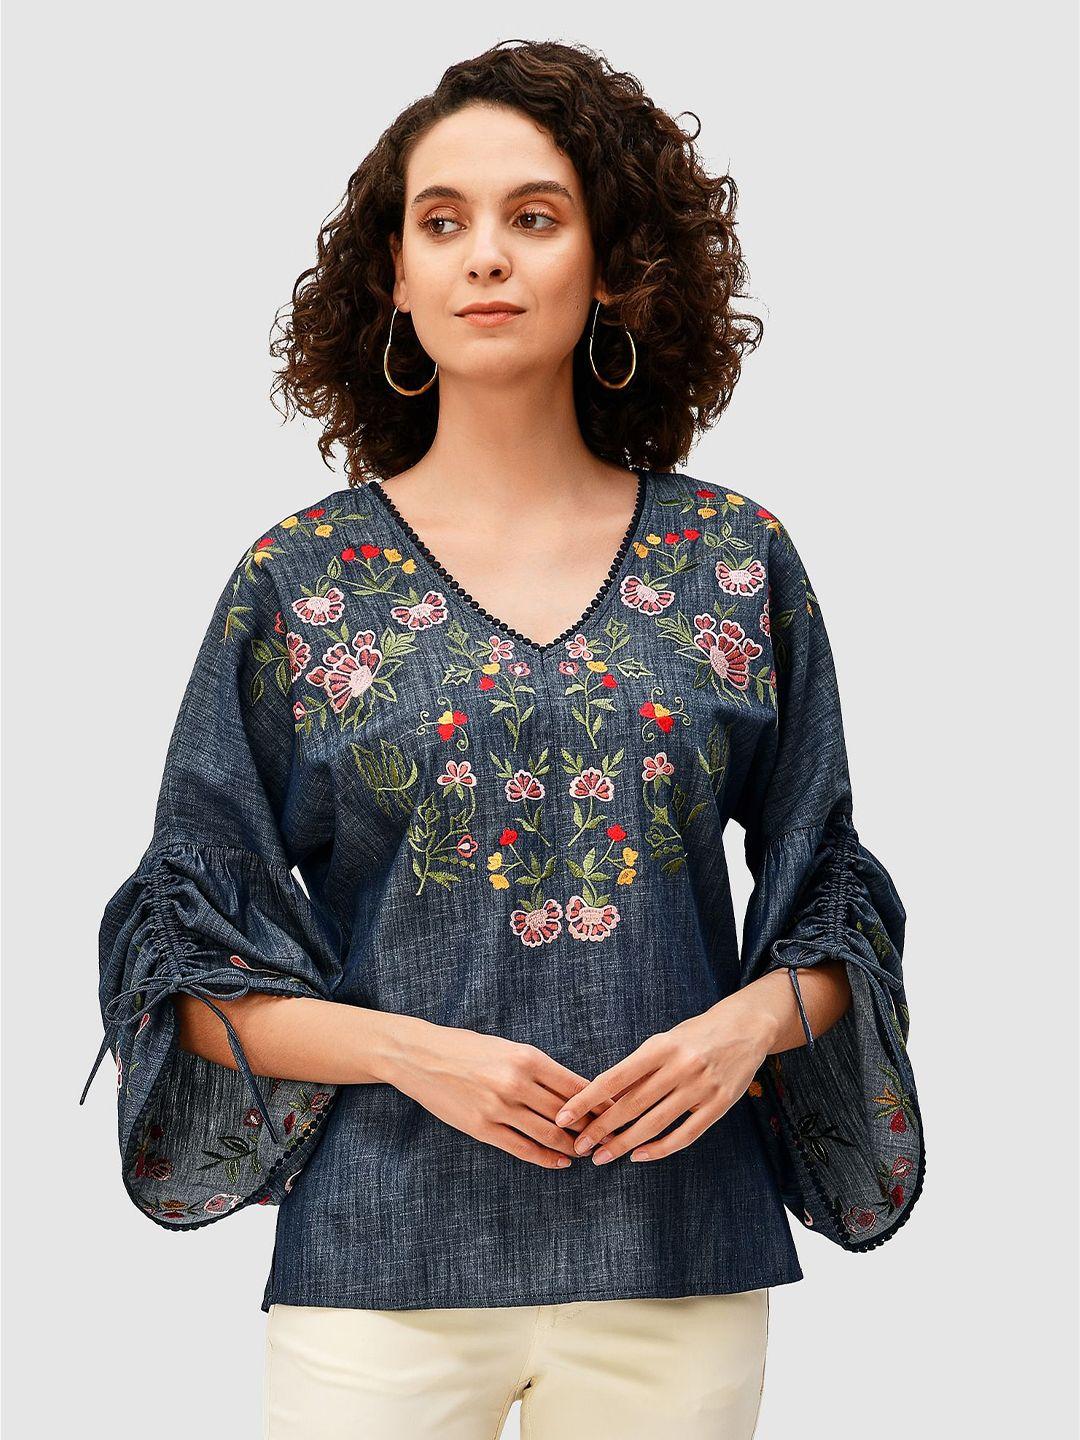 zapelle-floral-embroidered-tie-cuff-sleeves-linen-chambray-top